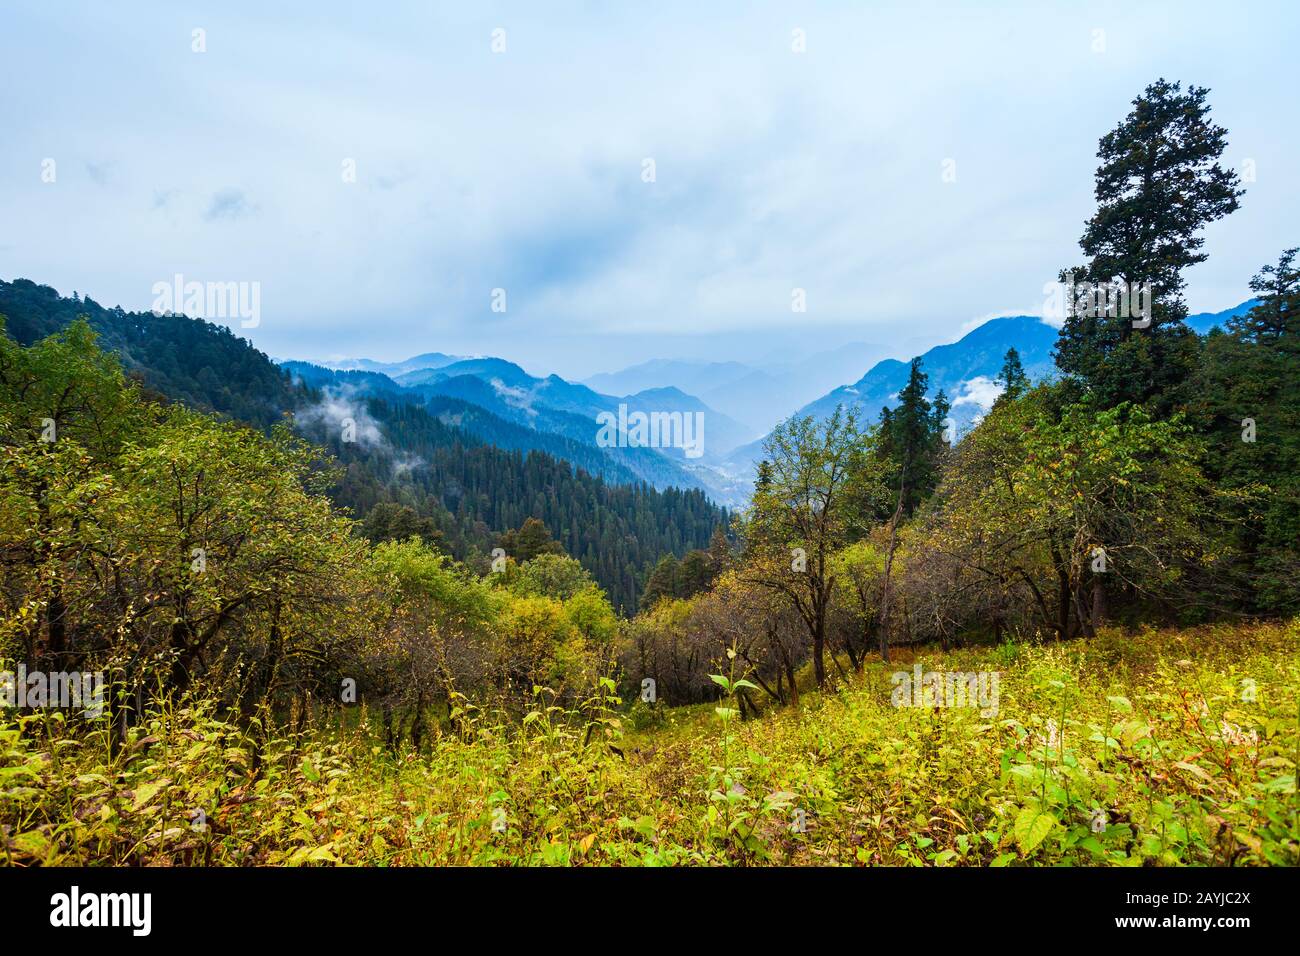 Scenic landscape view of the forested Himalaya mountain slope in clouds with the evergreen conifers in mist Stock Photo